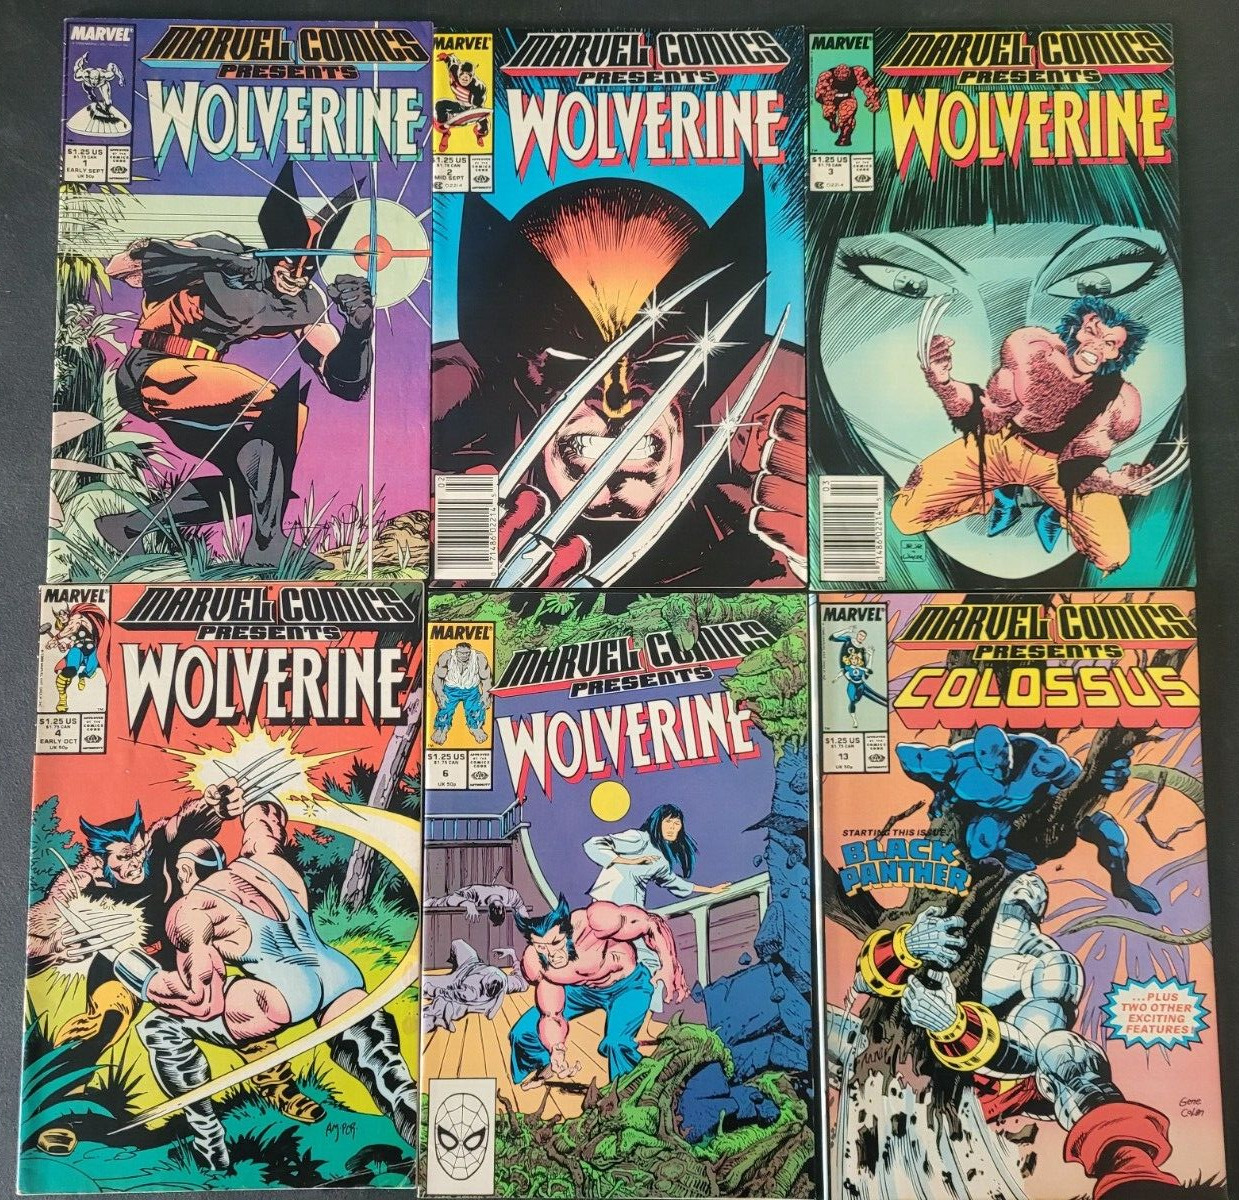 MARVEL COMICS PRESENTS SET OF 28 ISSUES (1988) WOLVERINE WEAPON X 1 84 85